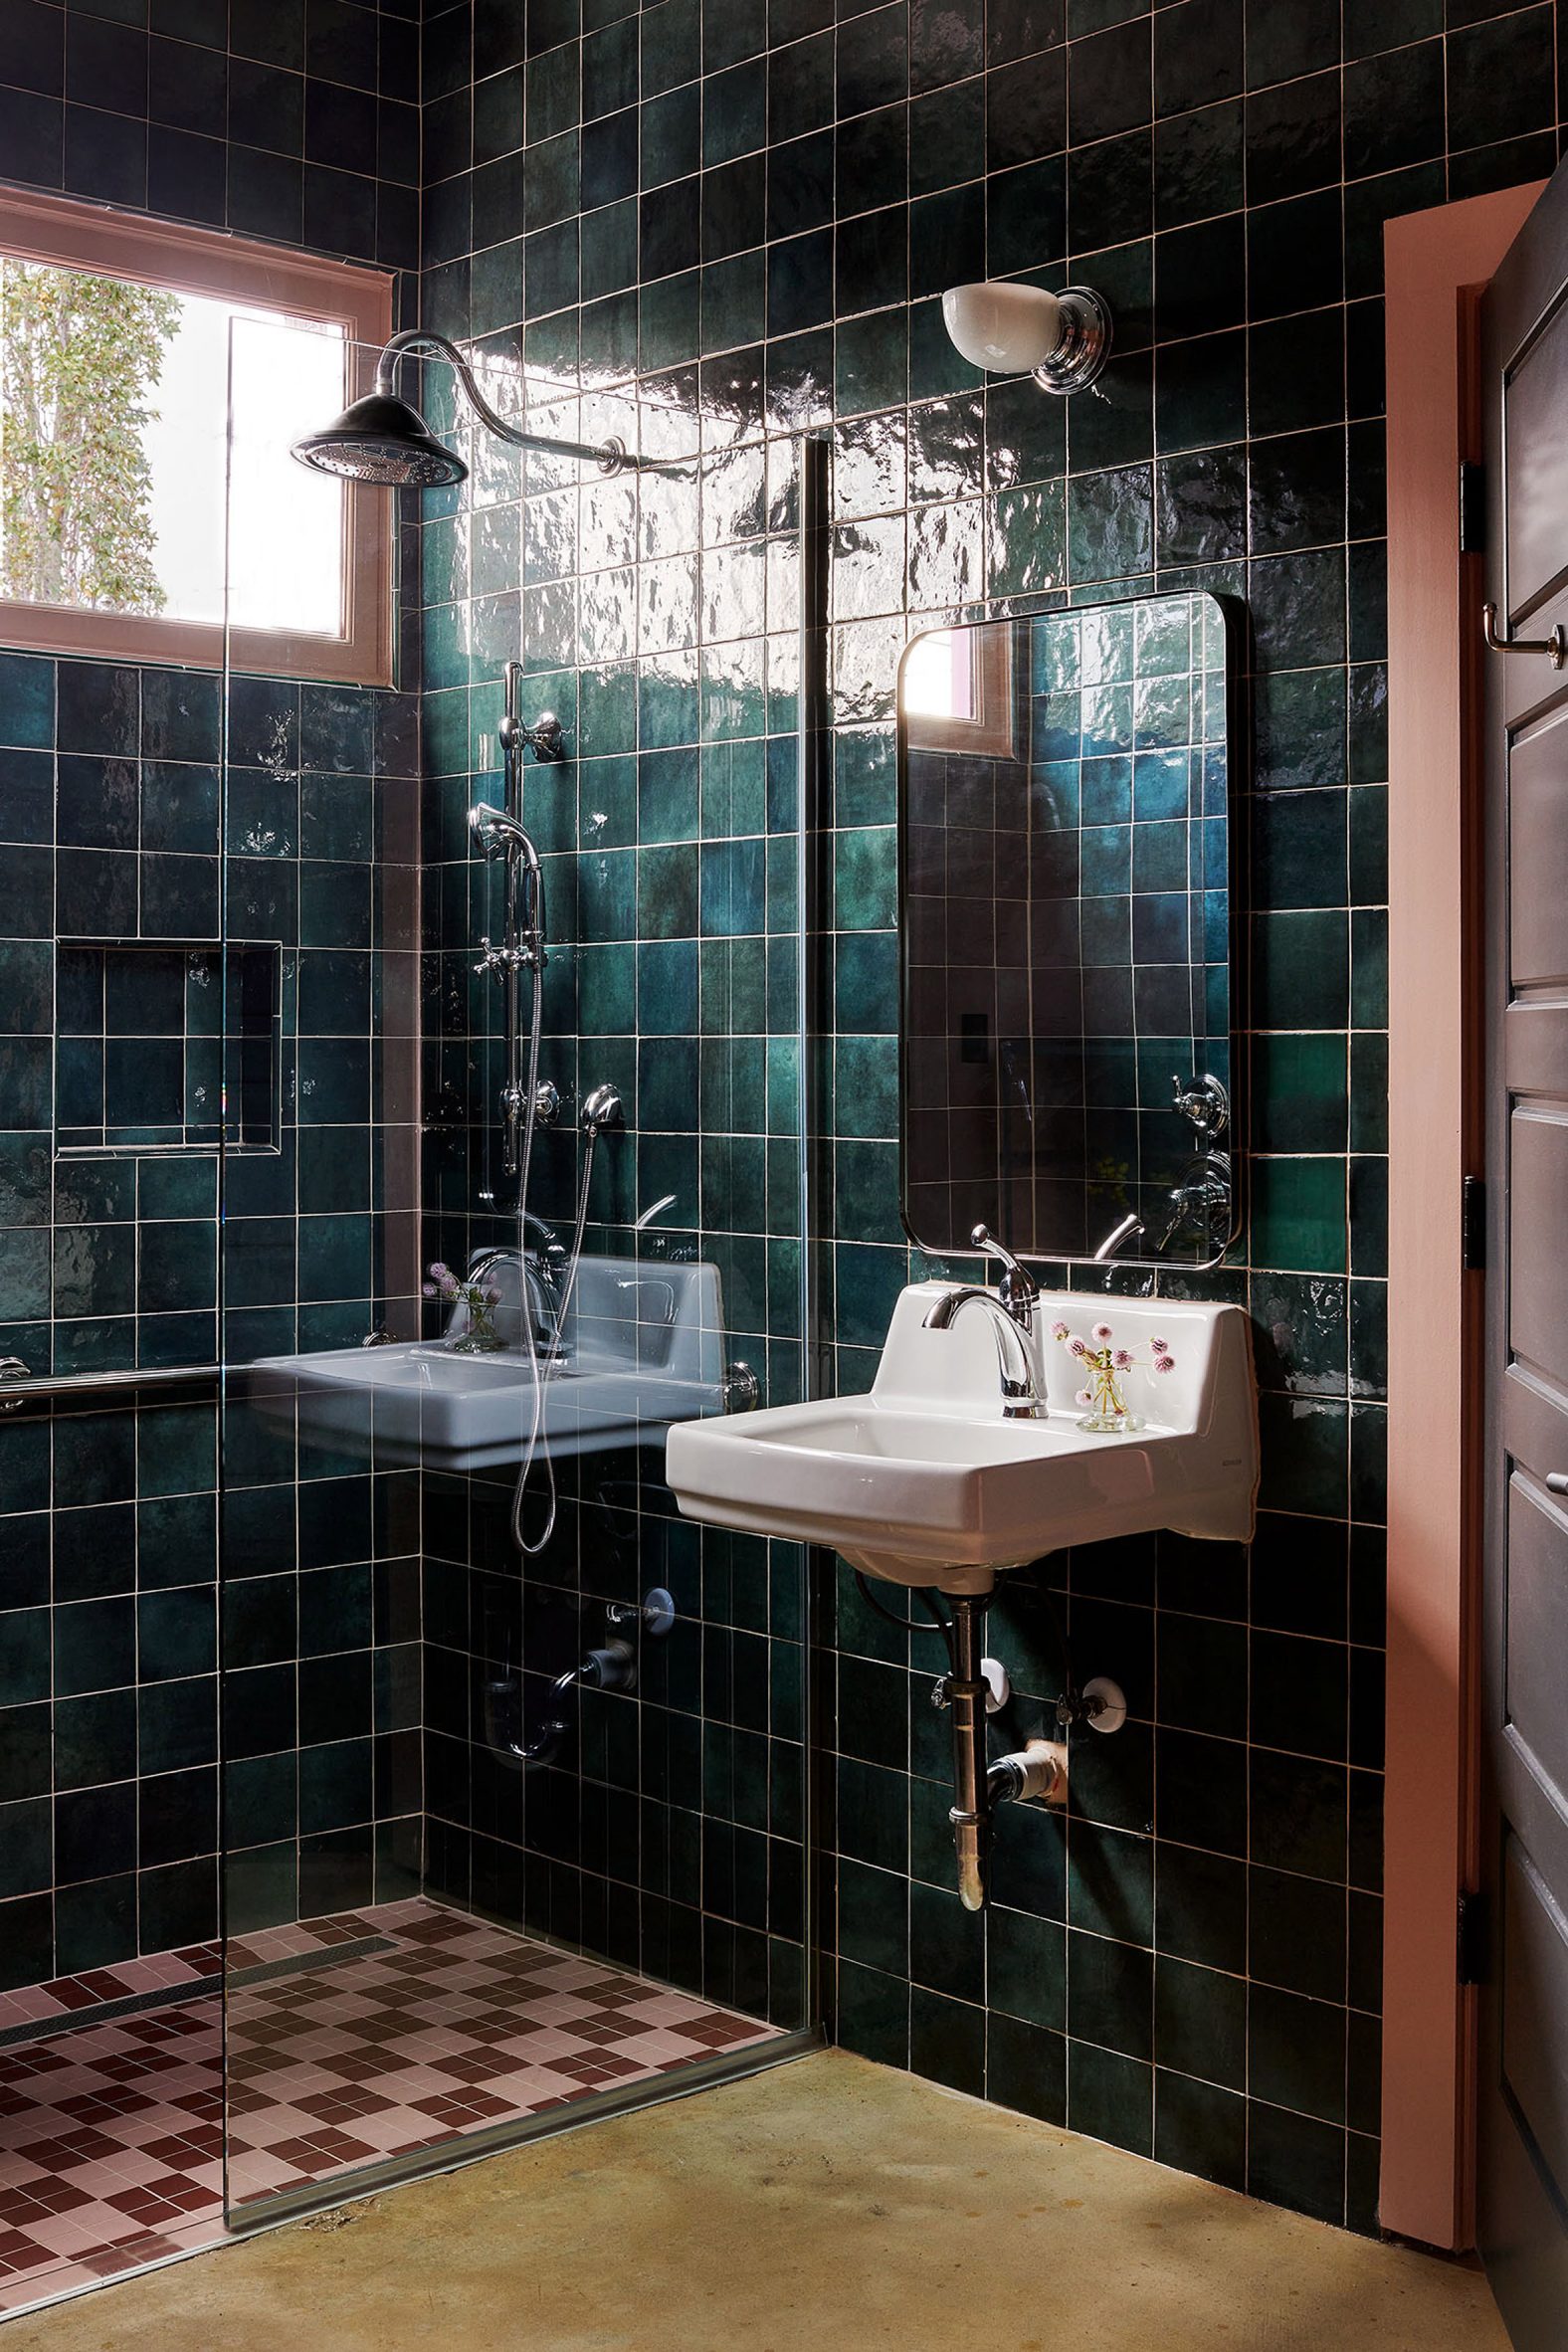 Bathroom with green, red and pink tiles